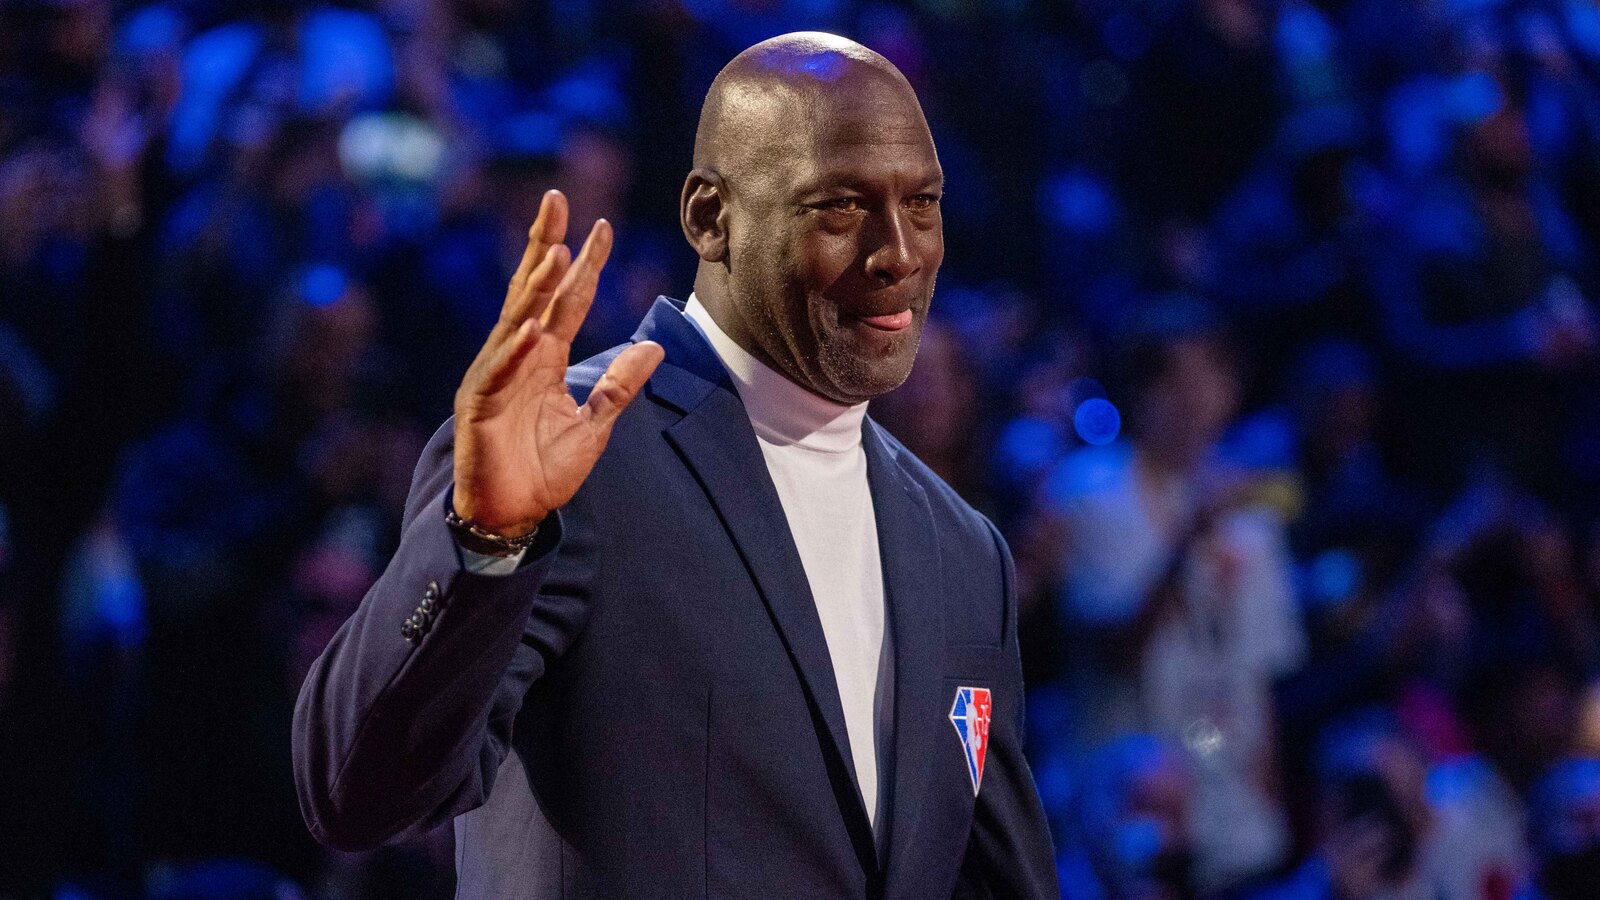 Michael Jordan Skipped Bulls’ Trip To White House After ’91 Championship To Gamble With Slim Bouler, Who Served 8 Years In Prison For Money Laundering Conviction